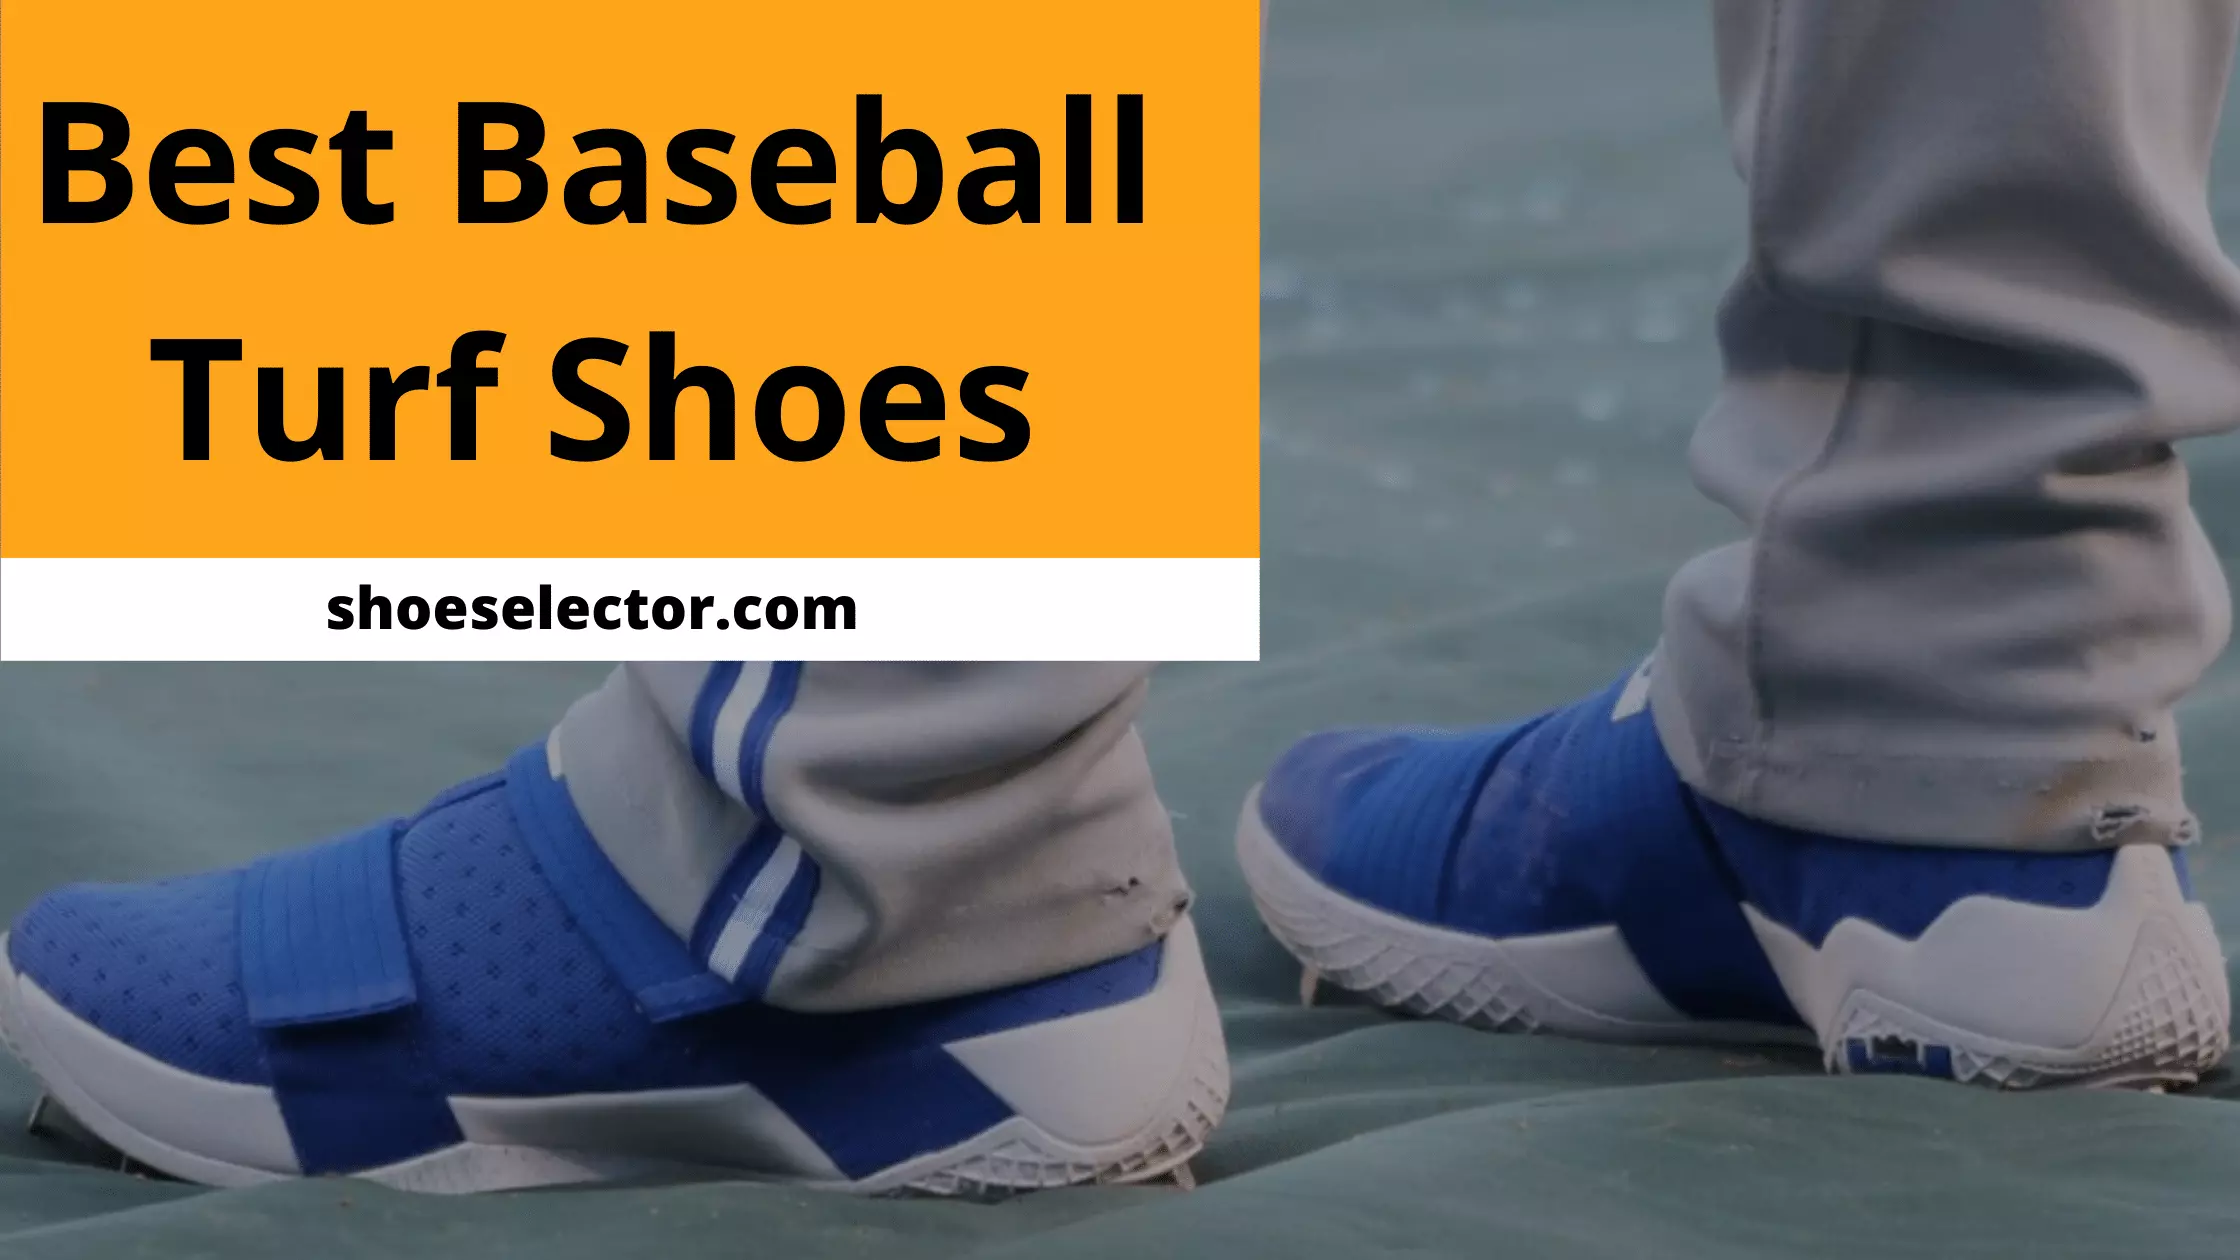 Best Baseball Turf Shoes - Comprehensive Guide